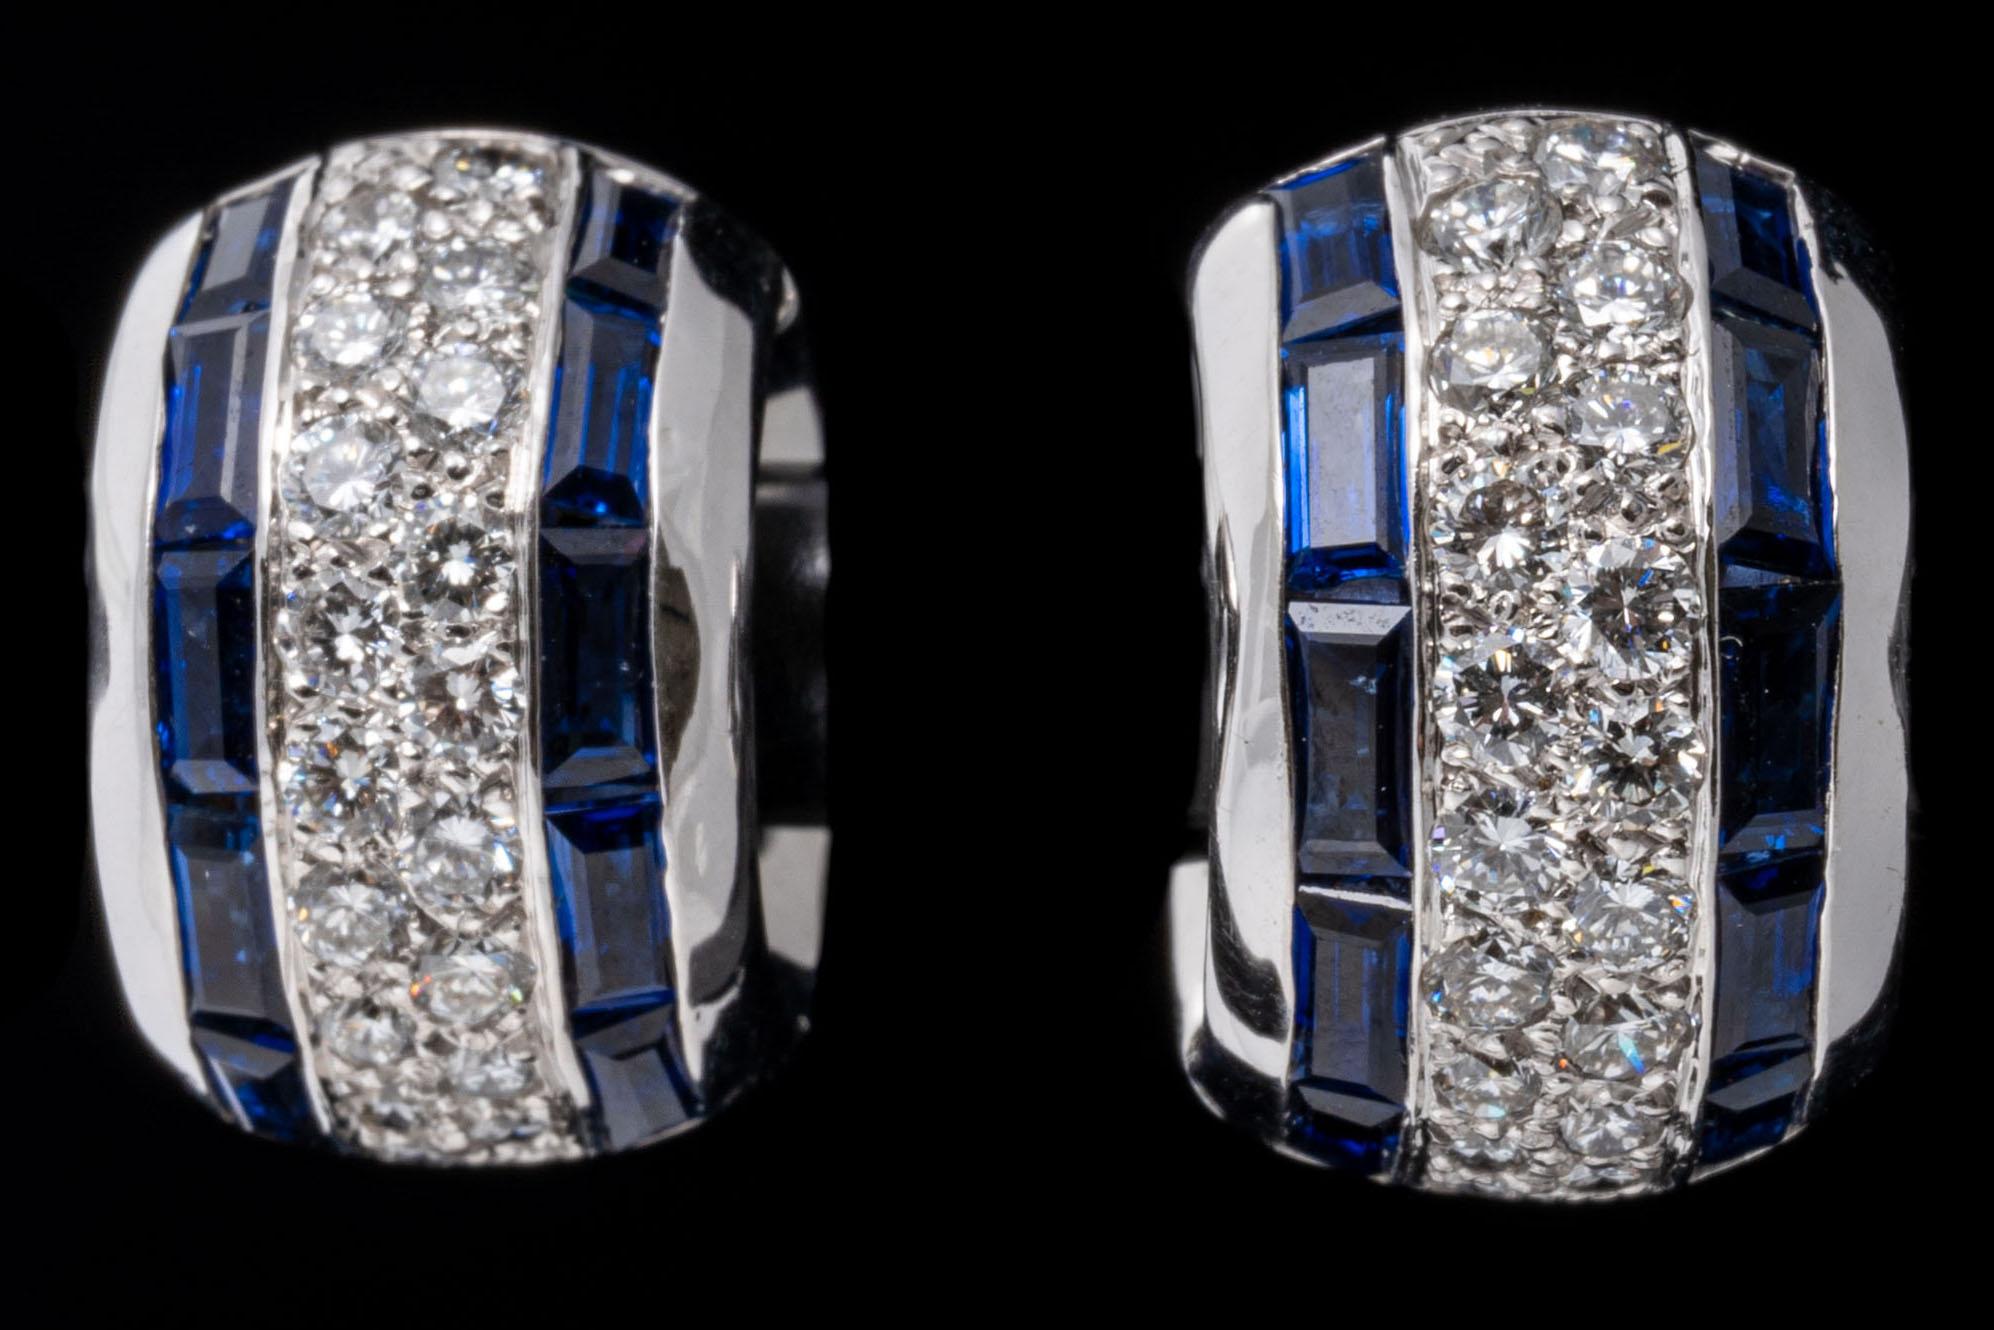 14k white gold earrings. These stunning earrings are a chubby huggie hoop style, decorated with a center row of pave set, round brilliant cut diamonds, approximately 0.64 TCW, and flanked with rectangular faceted, medium to dark blue color